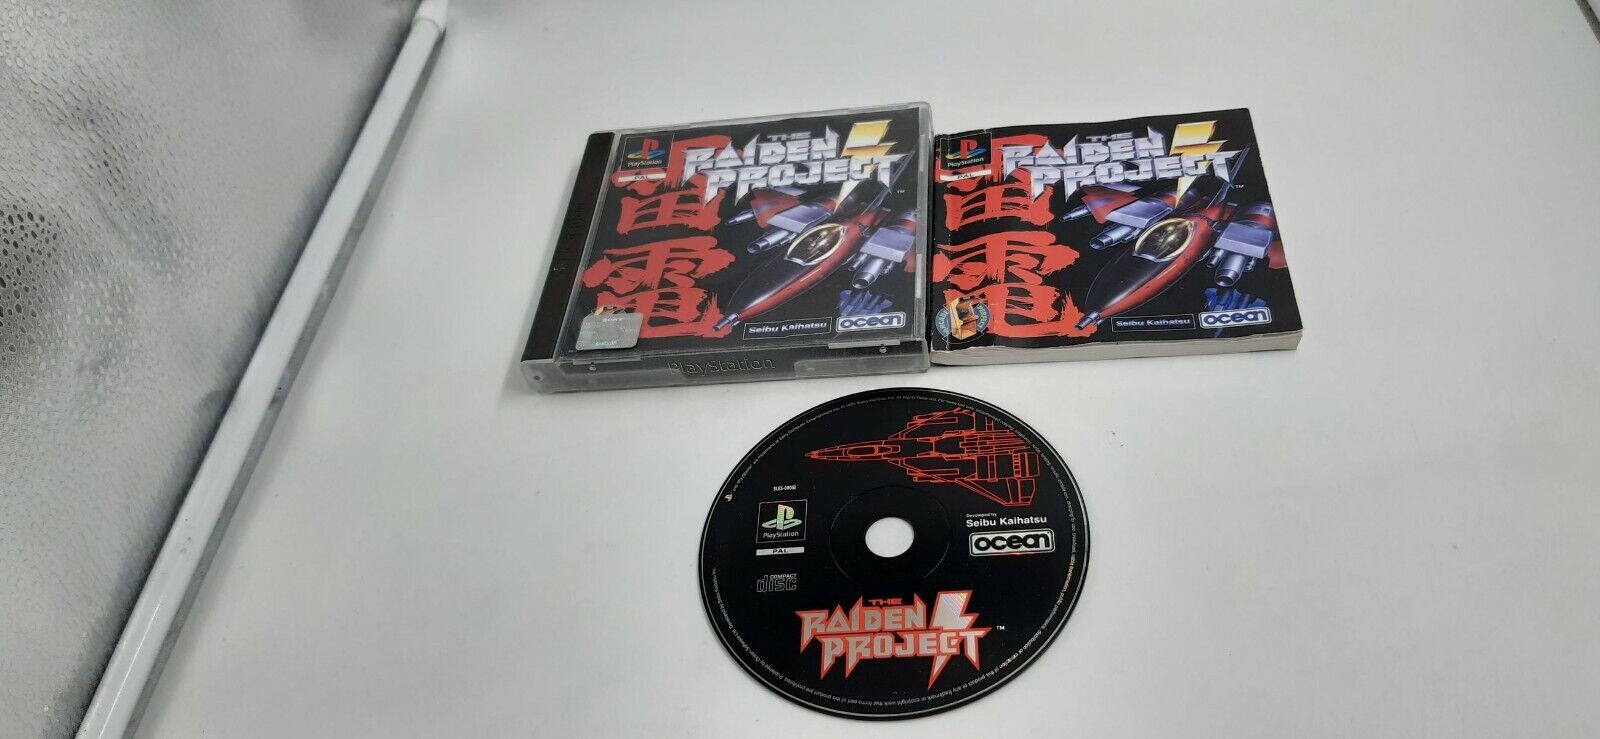 Jeu Sony Playstation PS1 The Raiden Project complet 